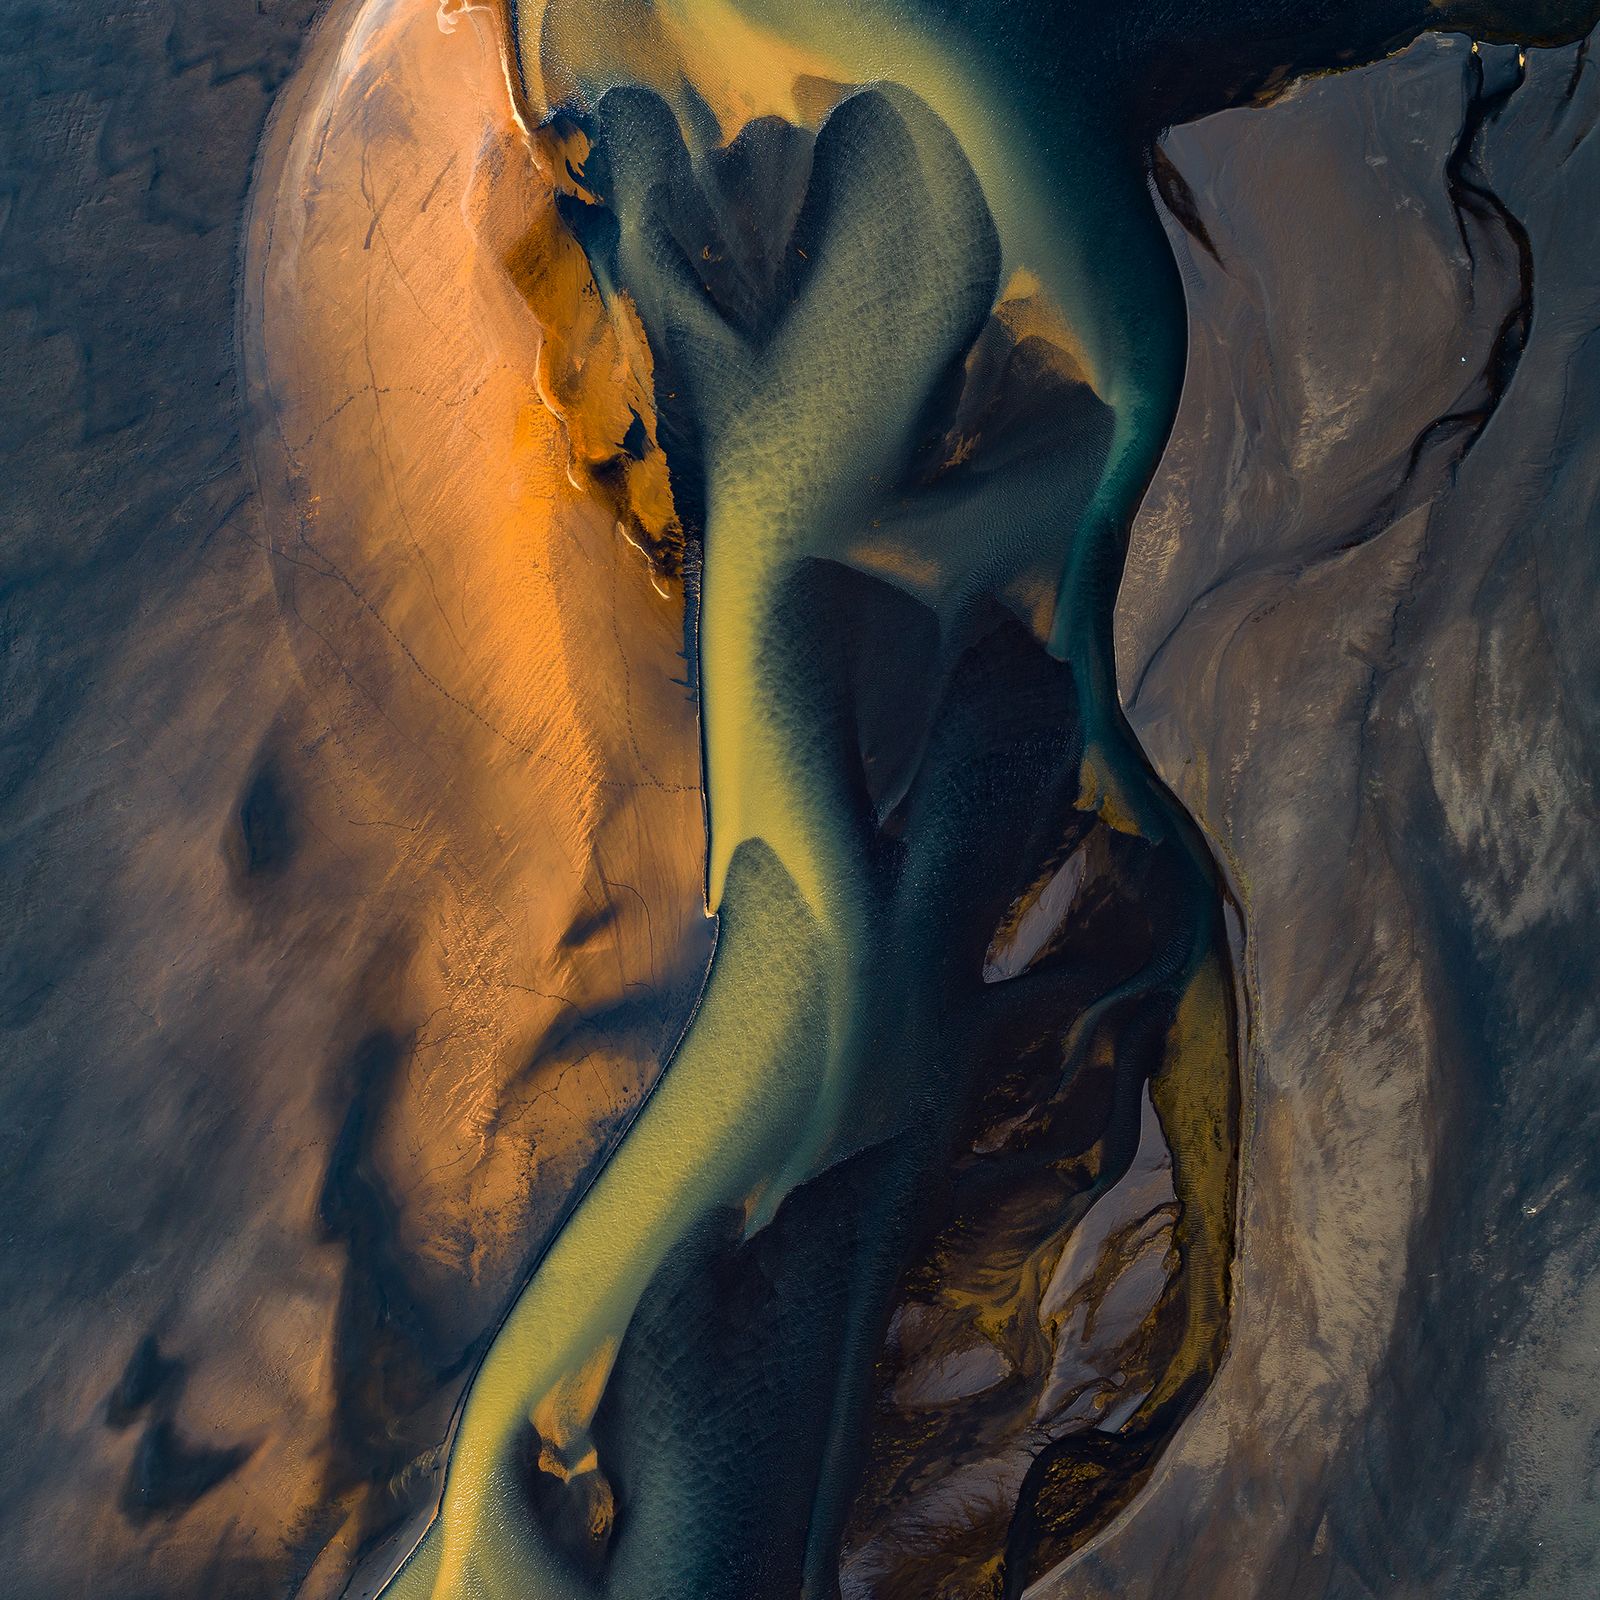 © Milan Radisics - Image from the How Water Shapes Earth photography project